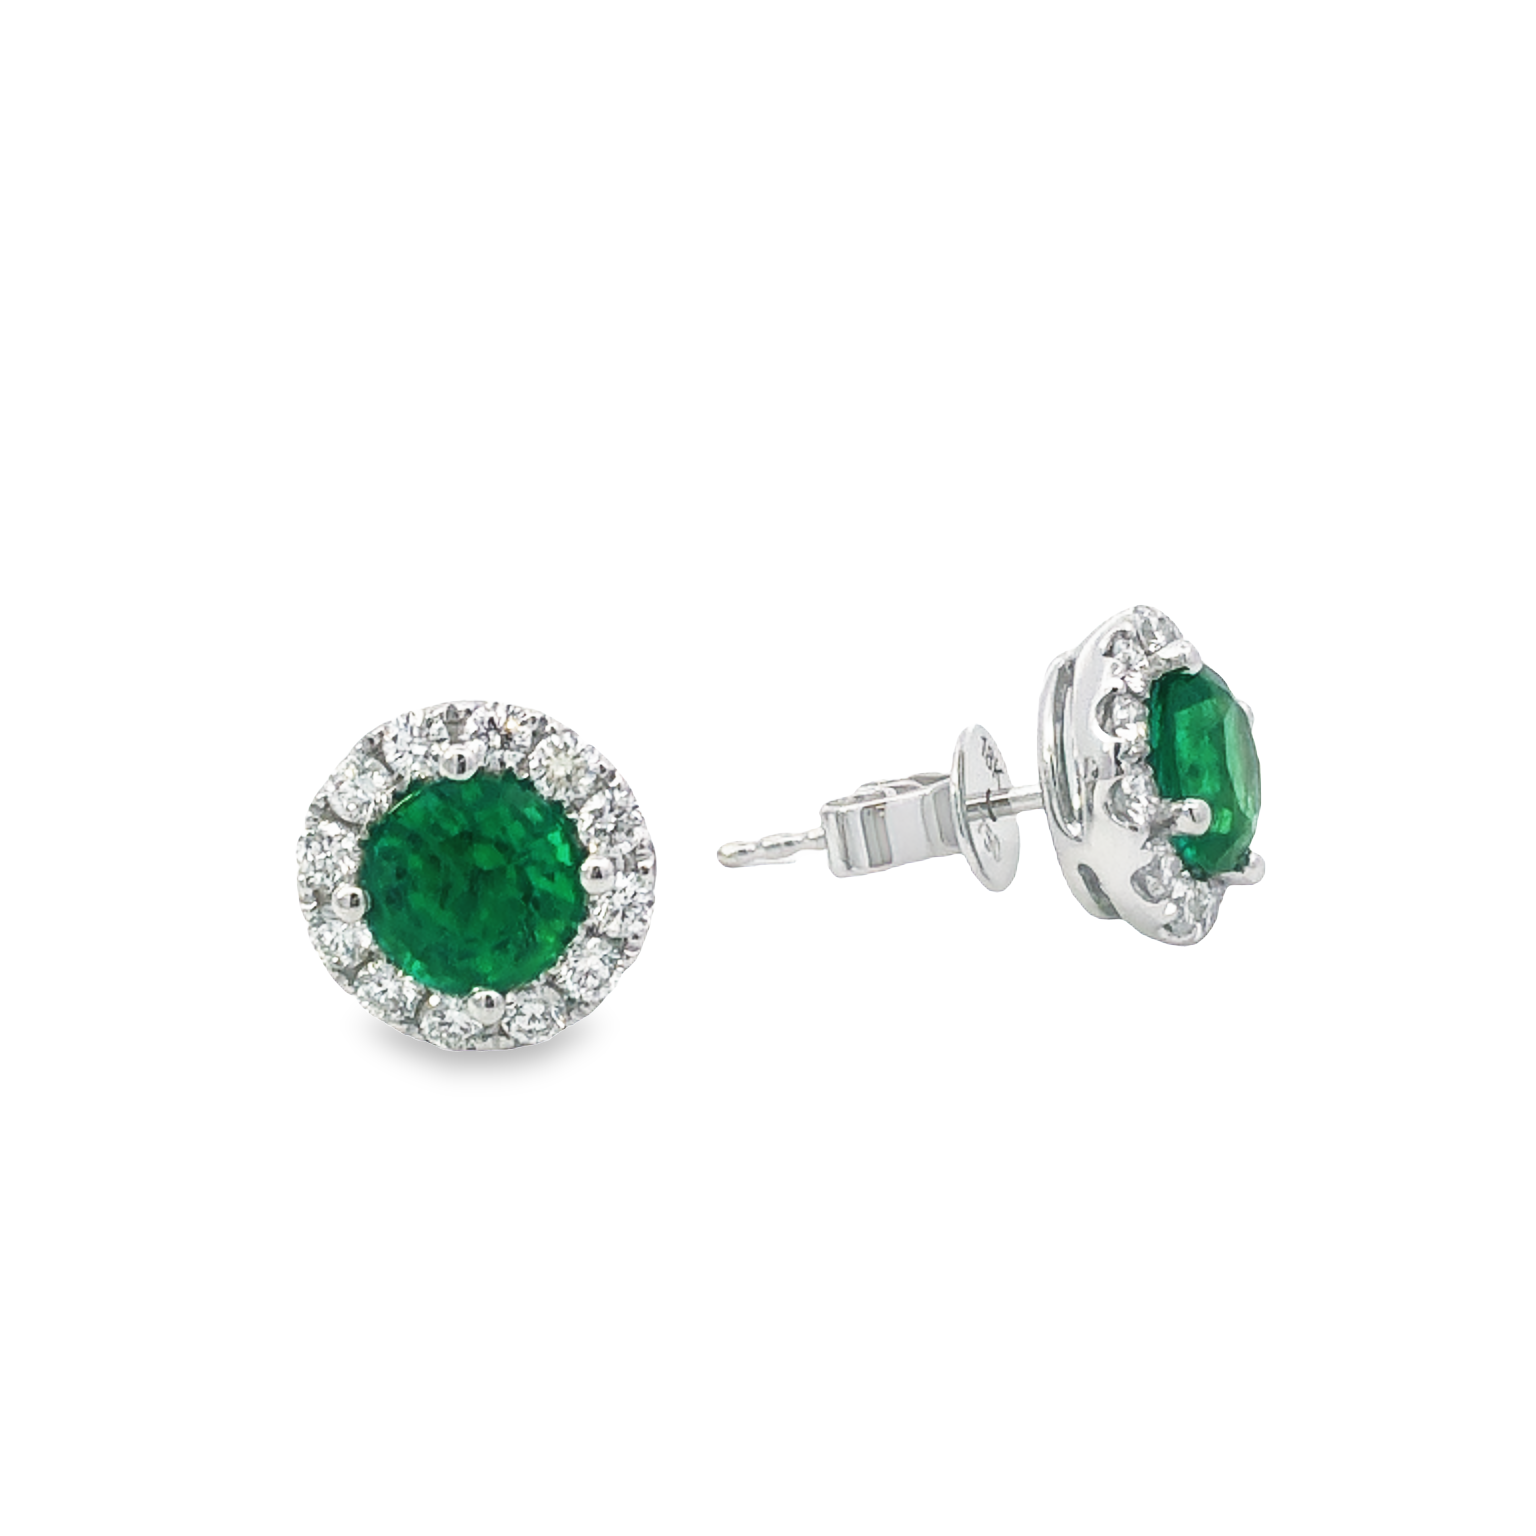 18K White Gold Emerald and Diamond Halo Earrings with 2 Round Emeralds